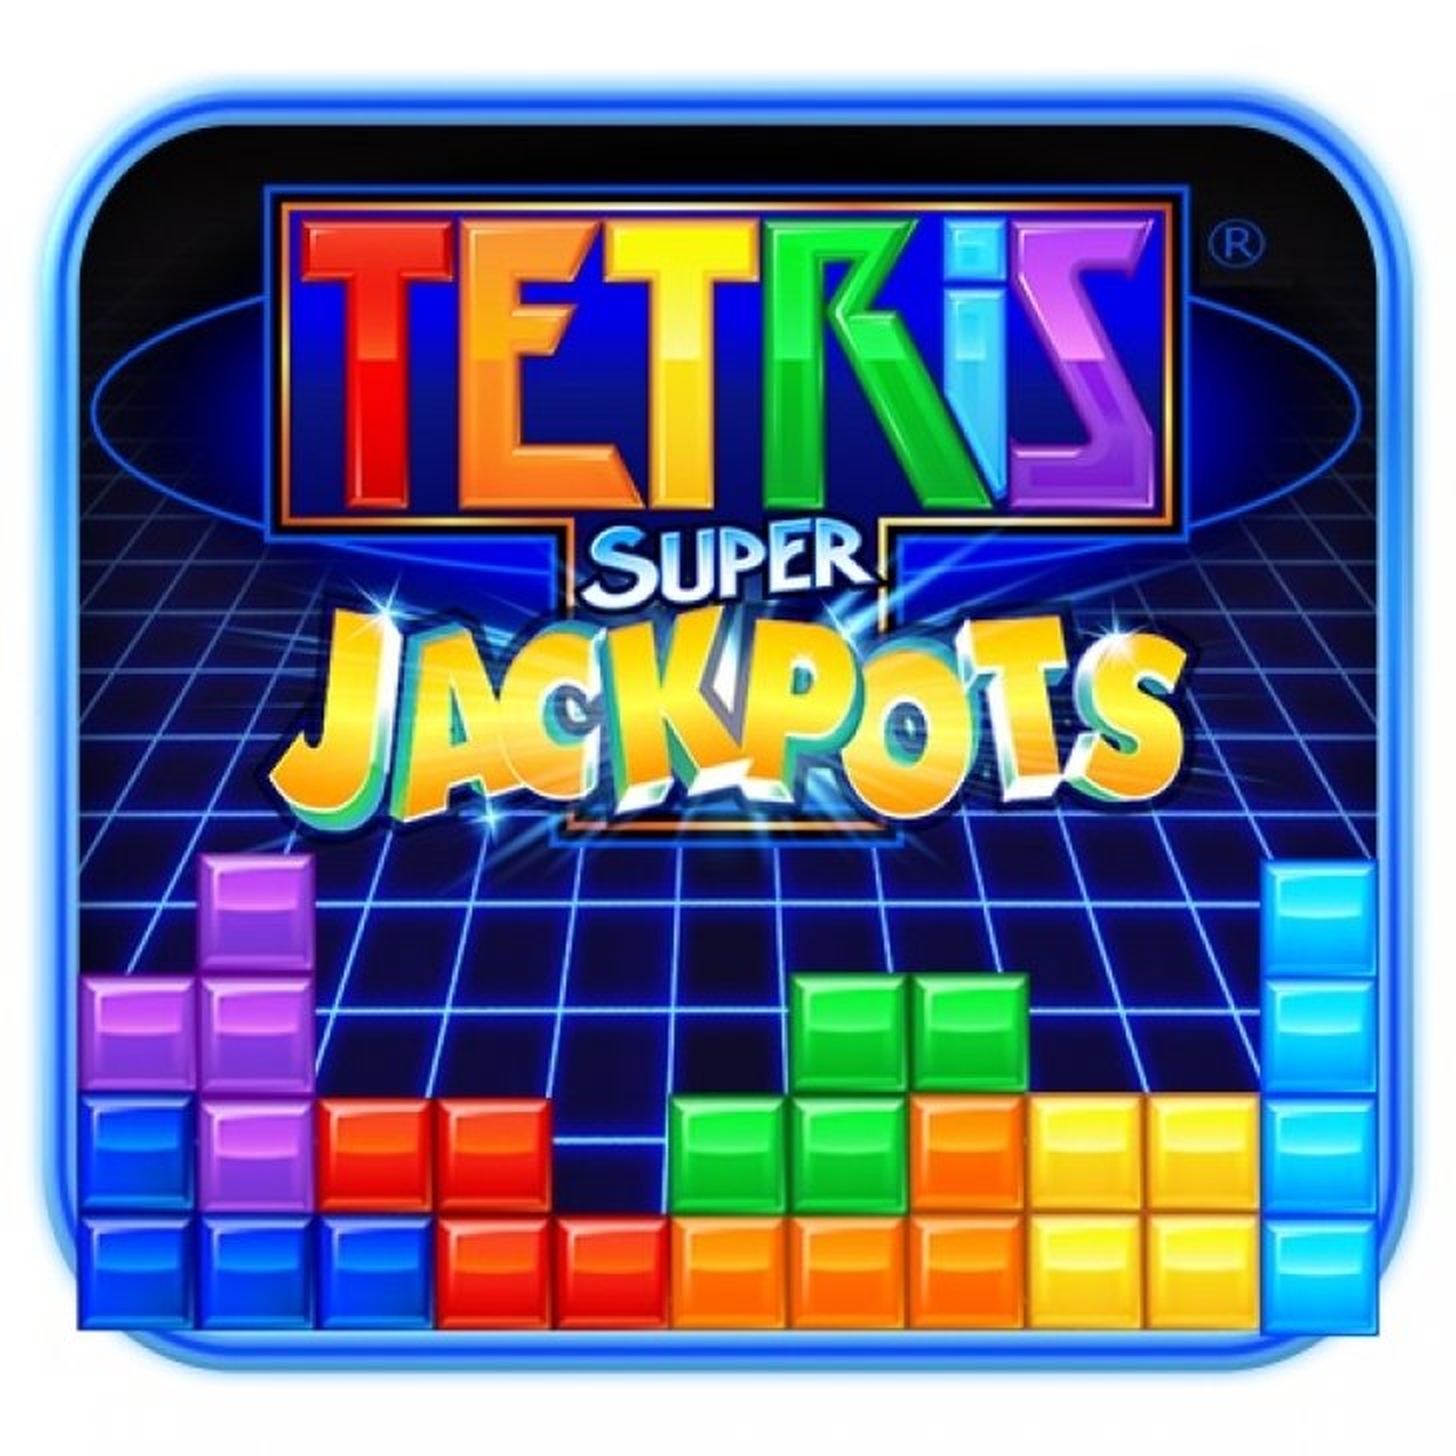 The Tetris Super Jackpots Online Slot Demo Game by Bally Technologies